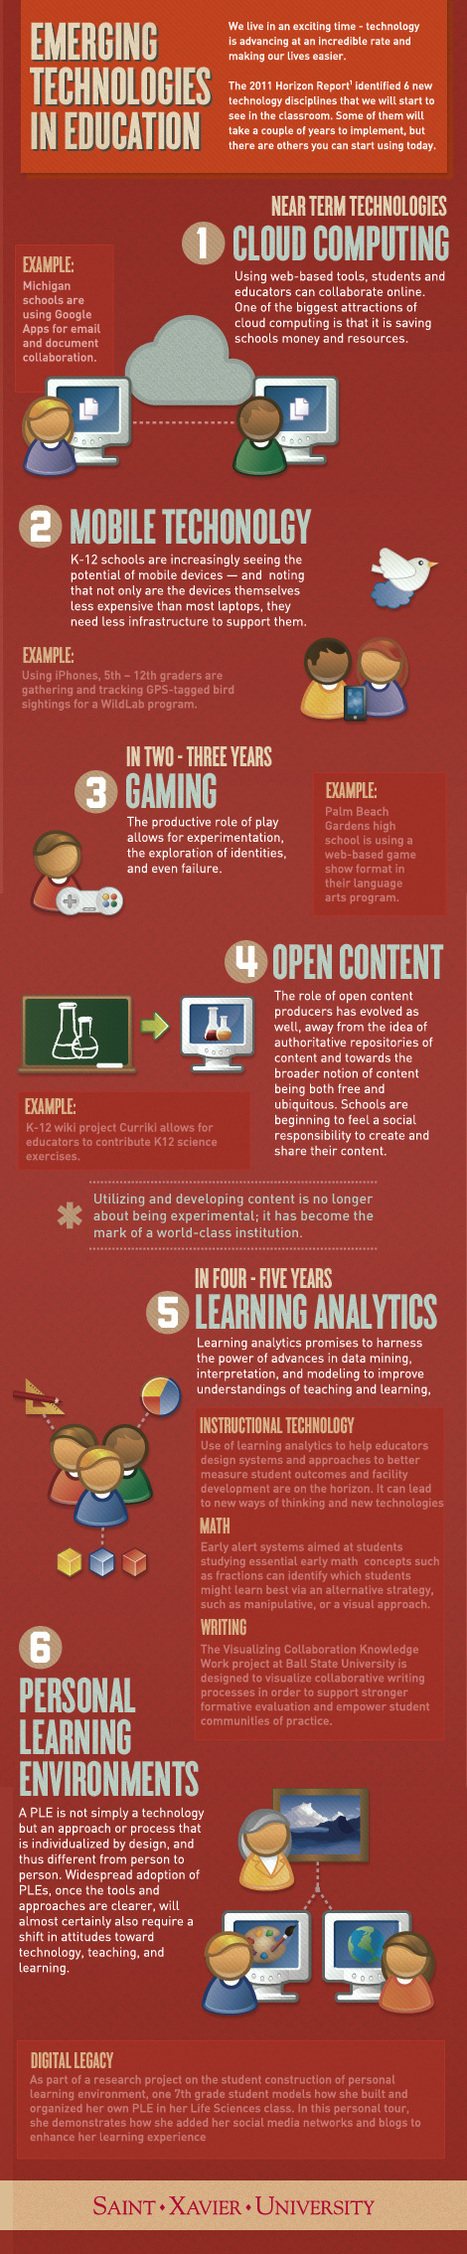 6 Emerging Educational Technologies Infographic | 21st Century Learning and Teaching | Scoop.it